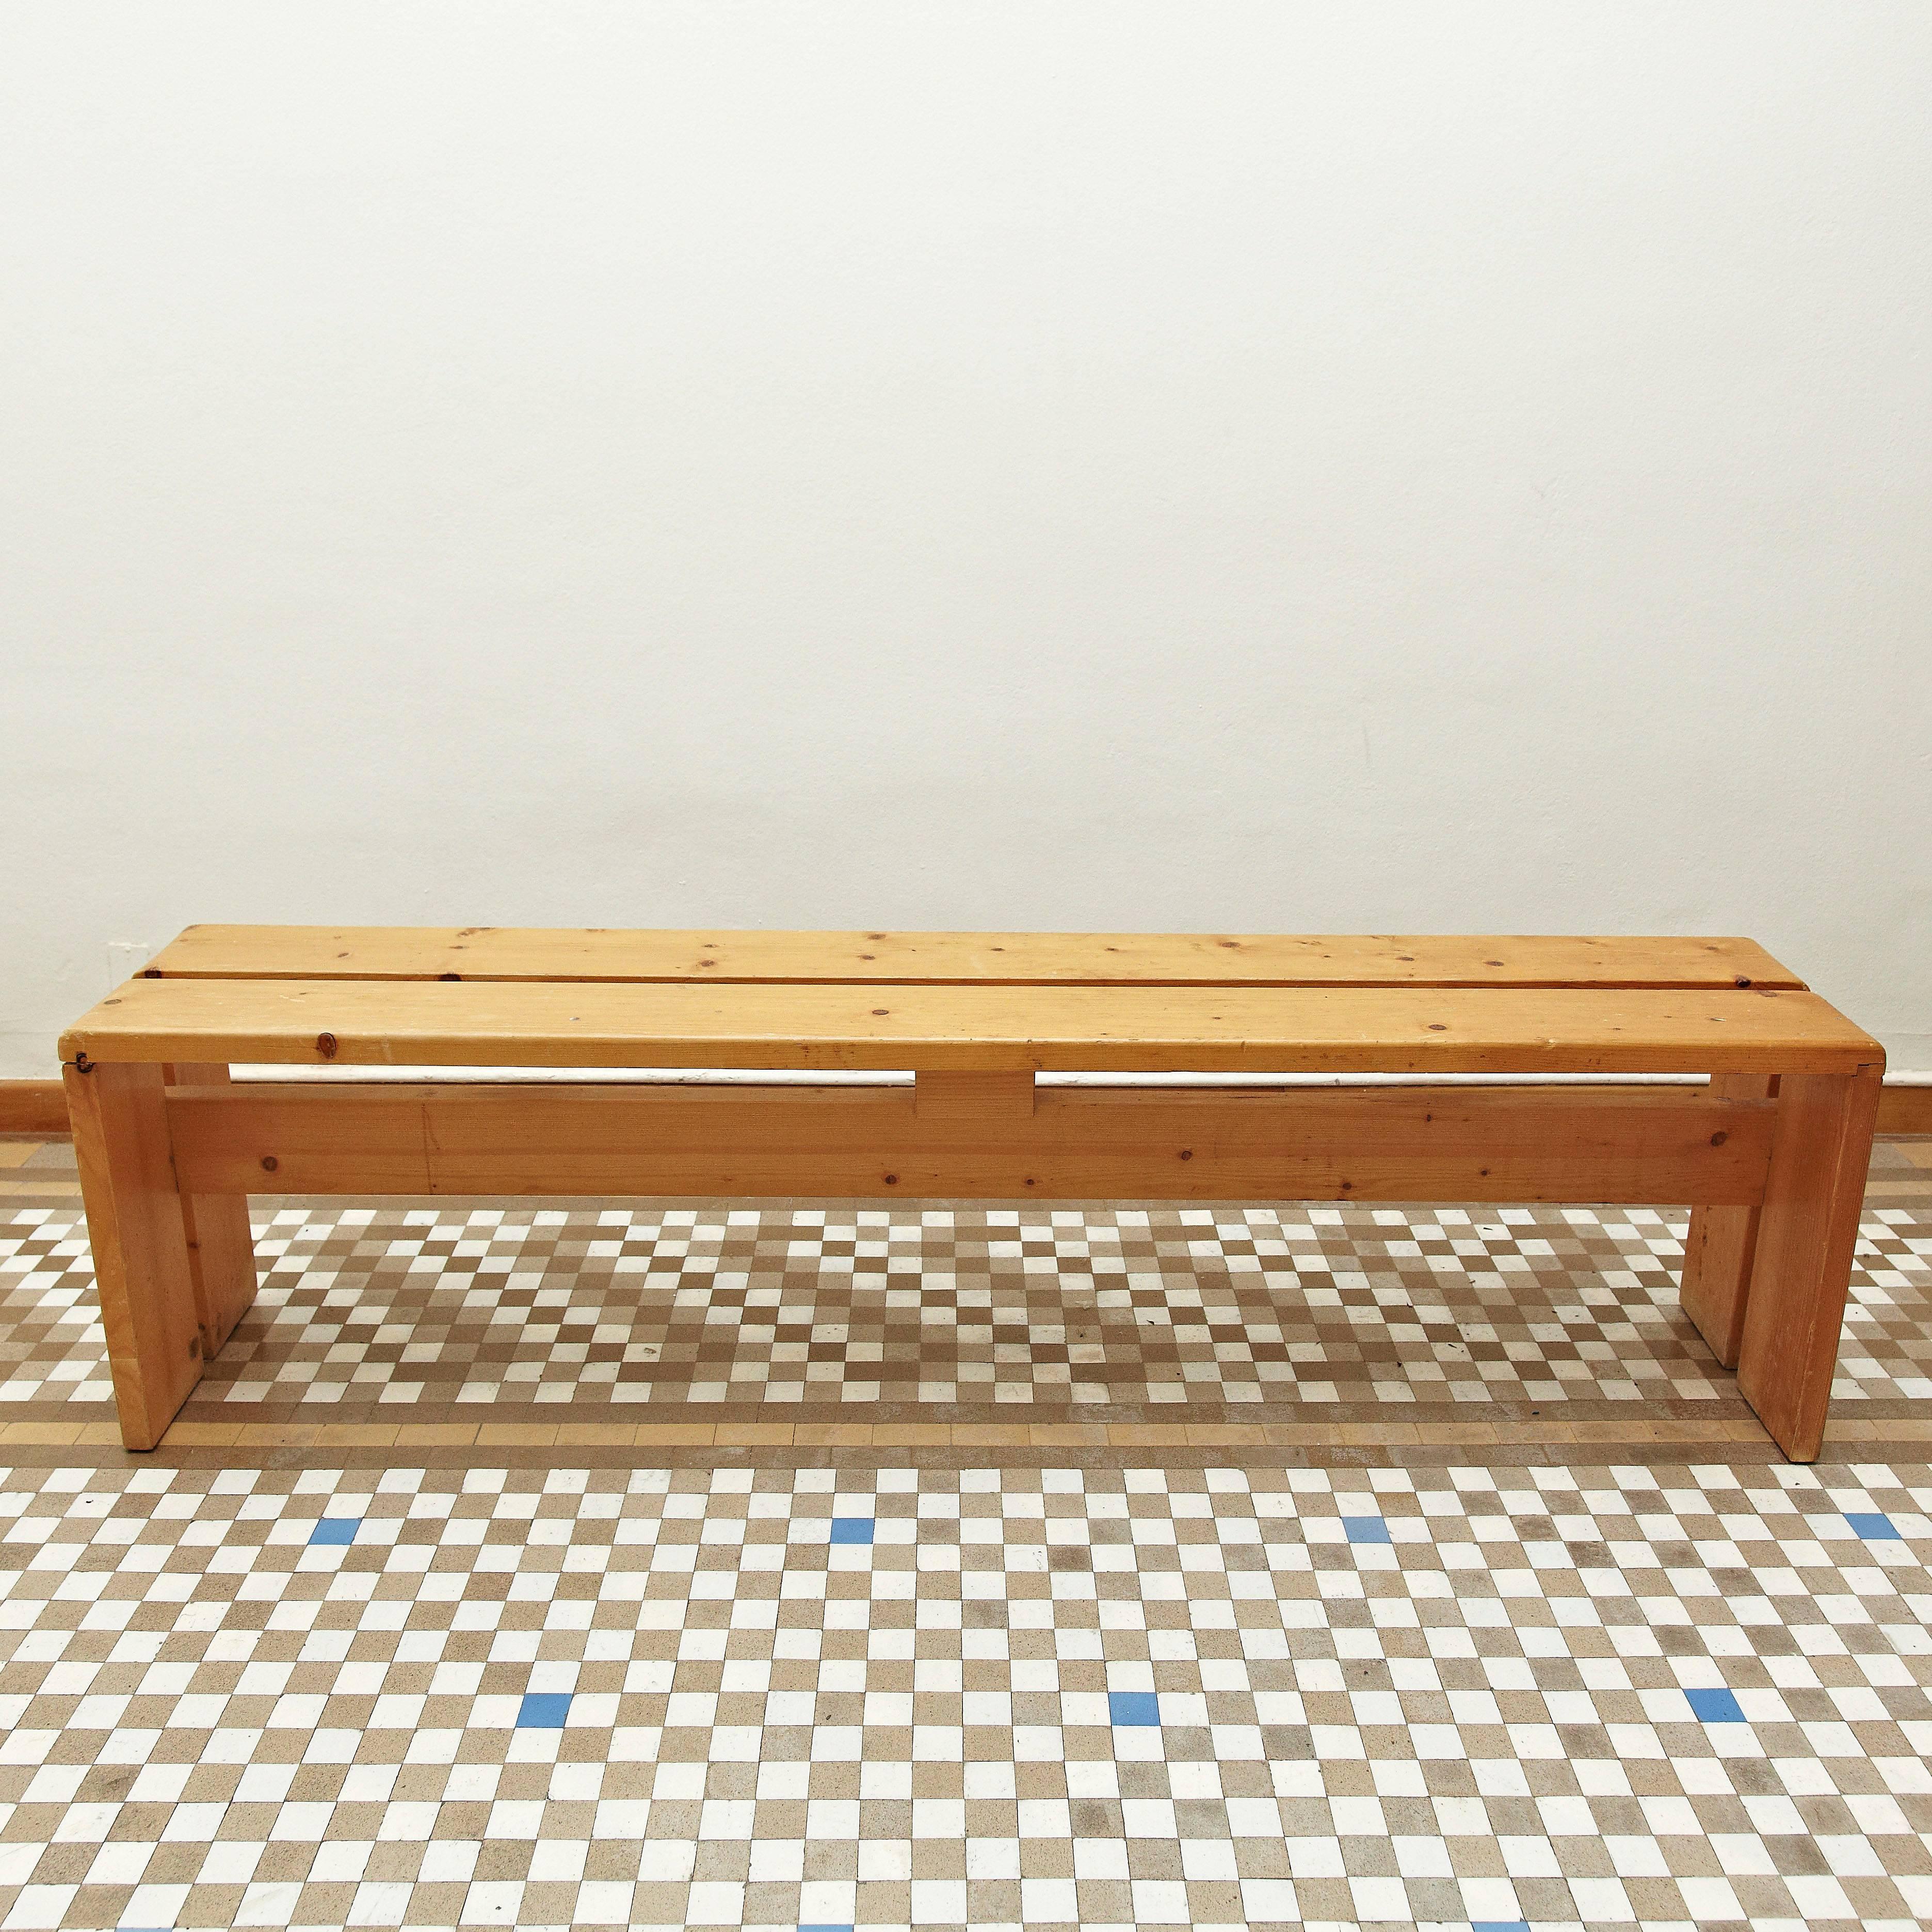 Bench designed by Charlotte Perriand for Les Arcs ski Resort circa 1960, manufactured in France.

Pinewood.

In good original condition, with minor wear consistent with age and use, preserving a beautiful patina.

Charlotte Perriand